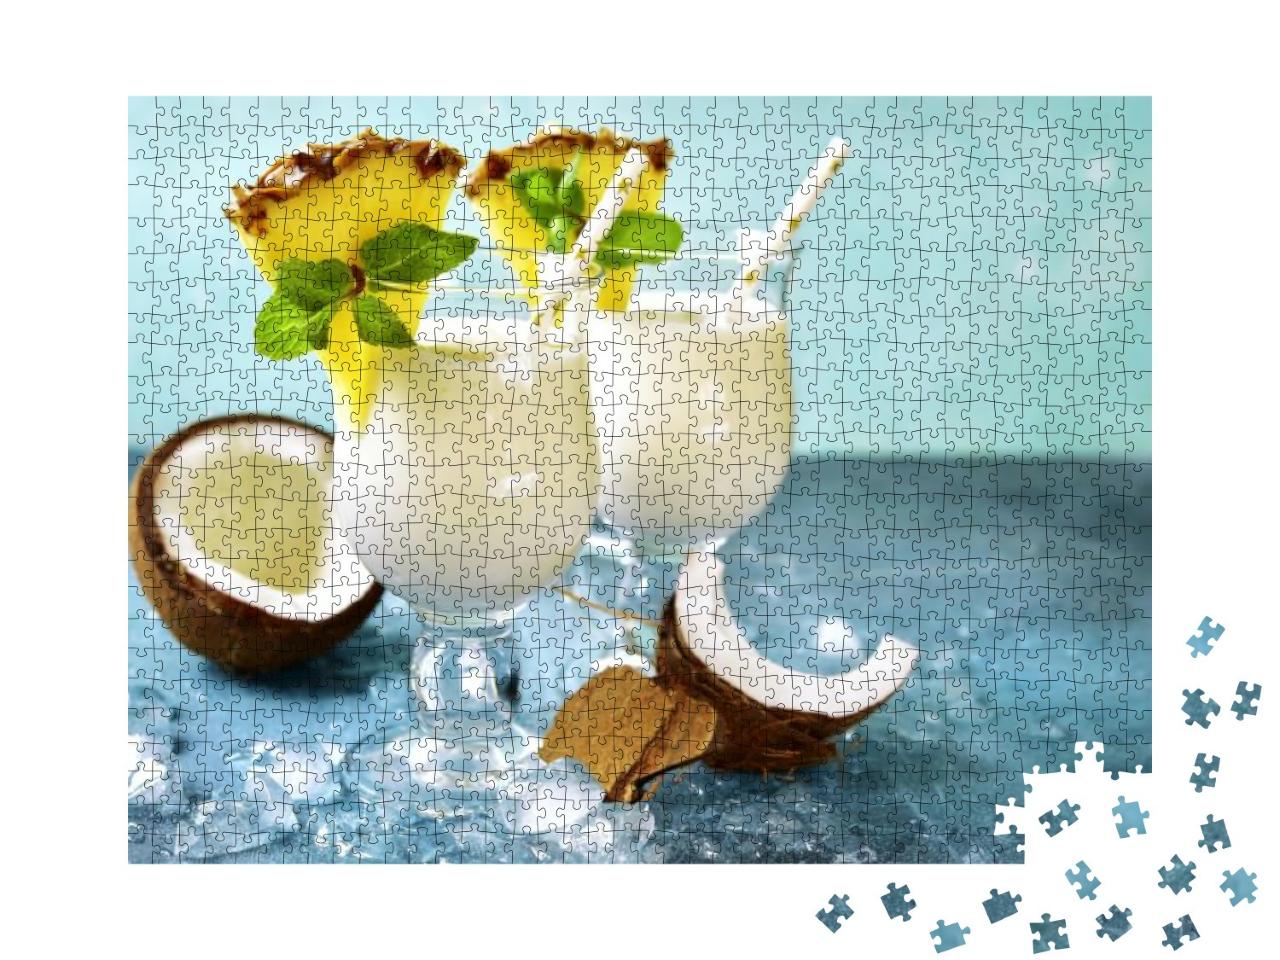 Traditional Caribbean Cocktail Pina Colada in a Glasses o... Jigsaw Puzzle with 1000 pieces